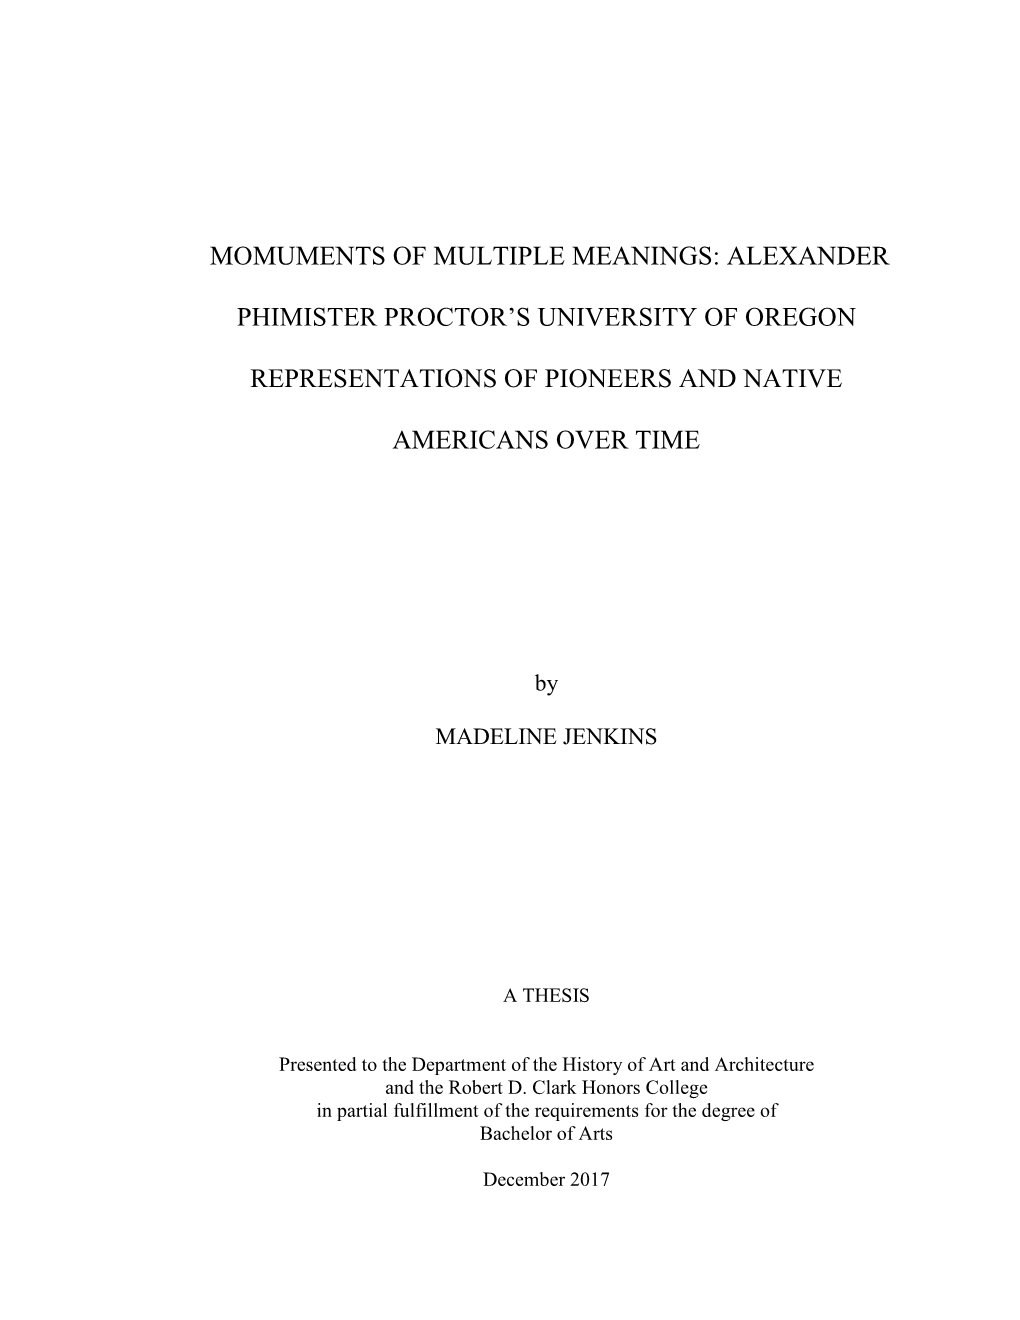 Alexander Phimister Proctor's University of Oregon Representations of Pioneers and Native Amer